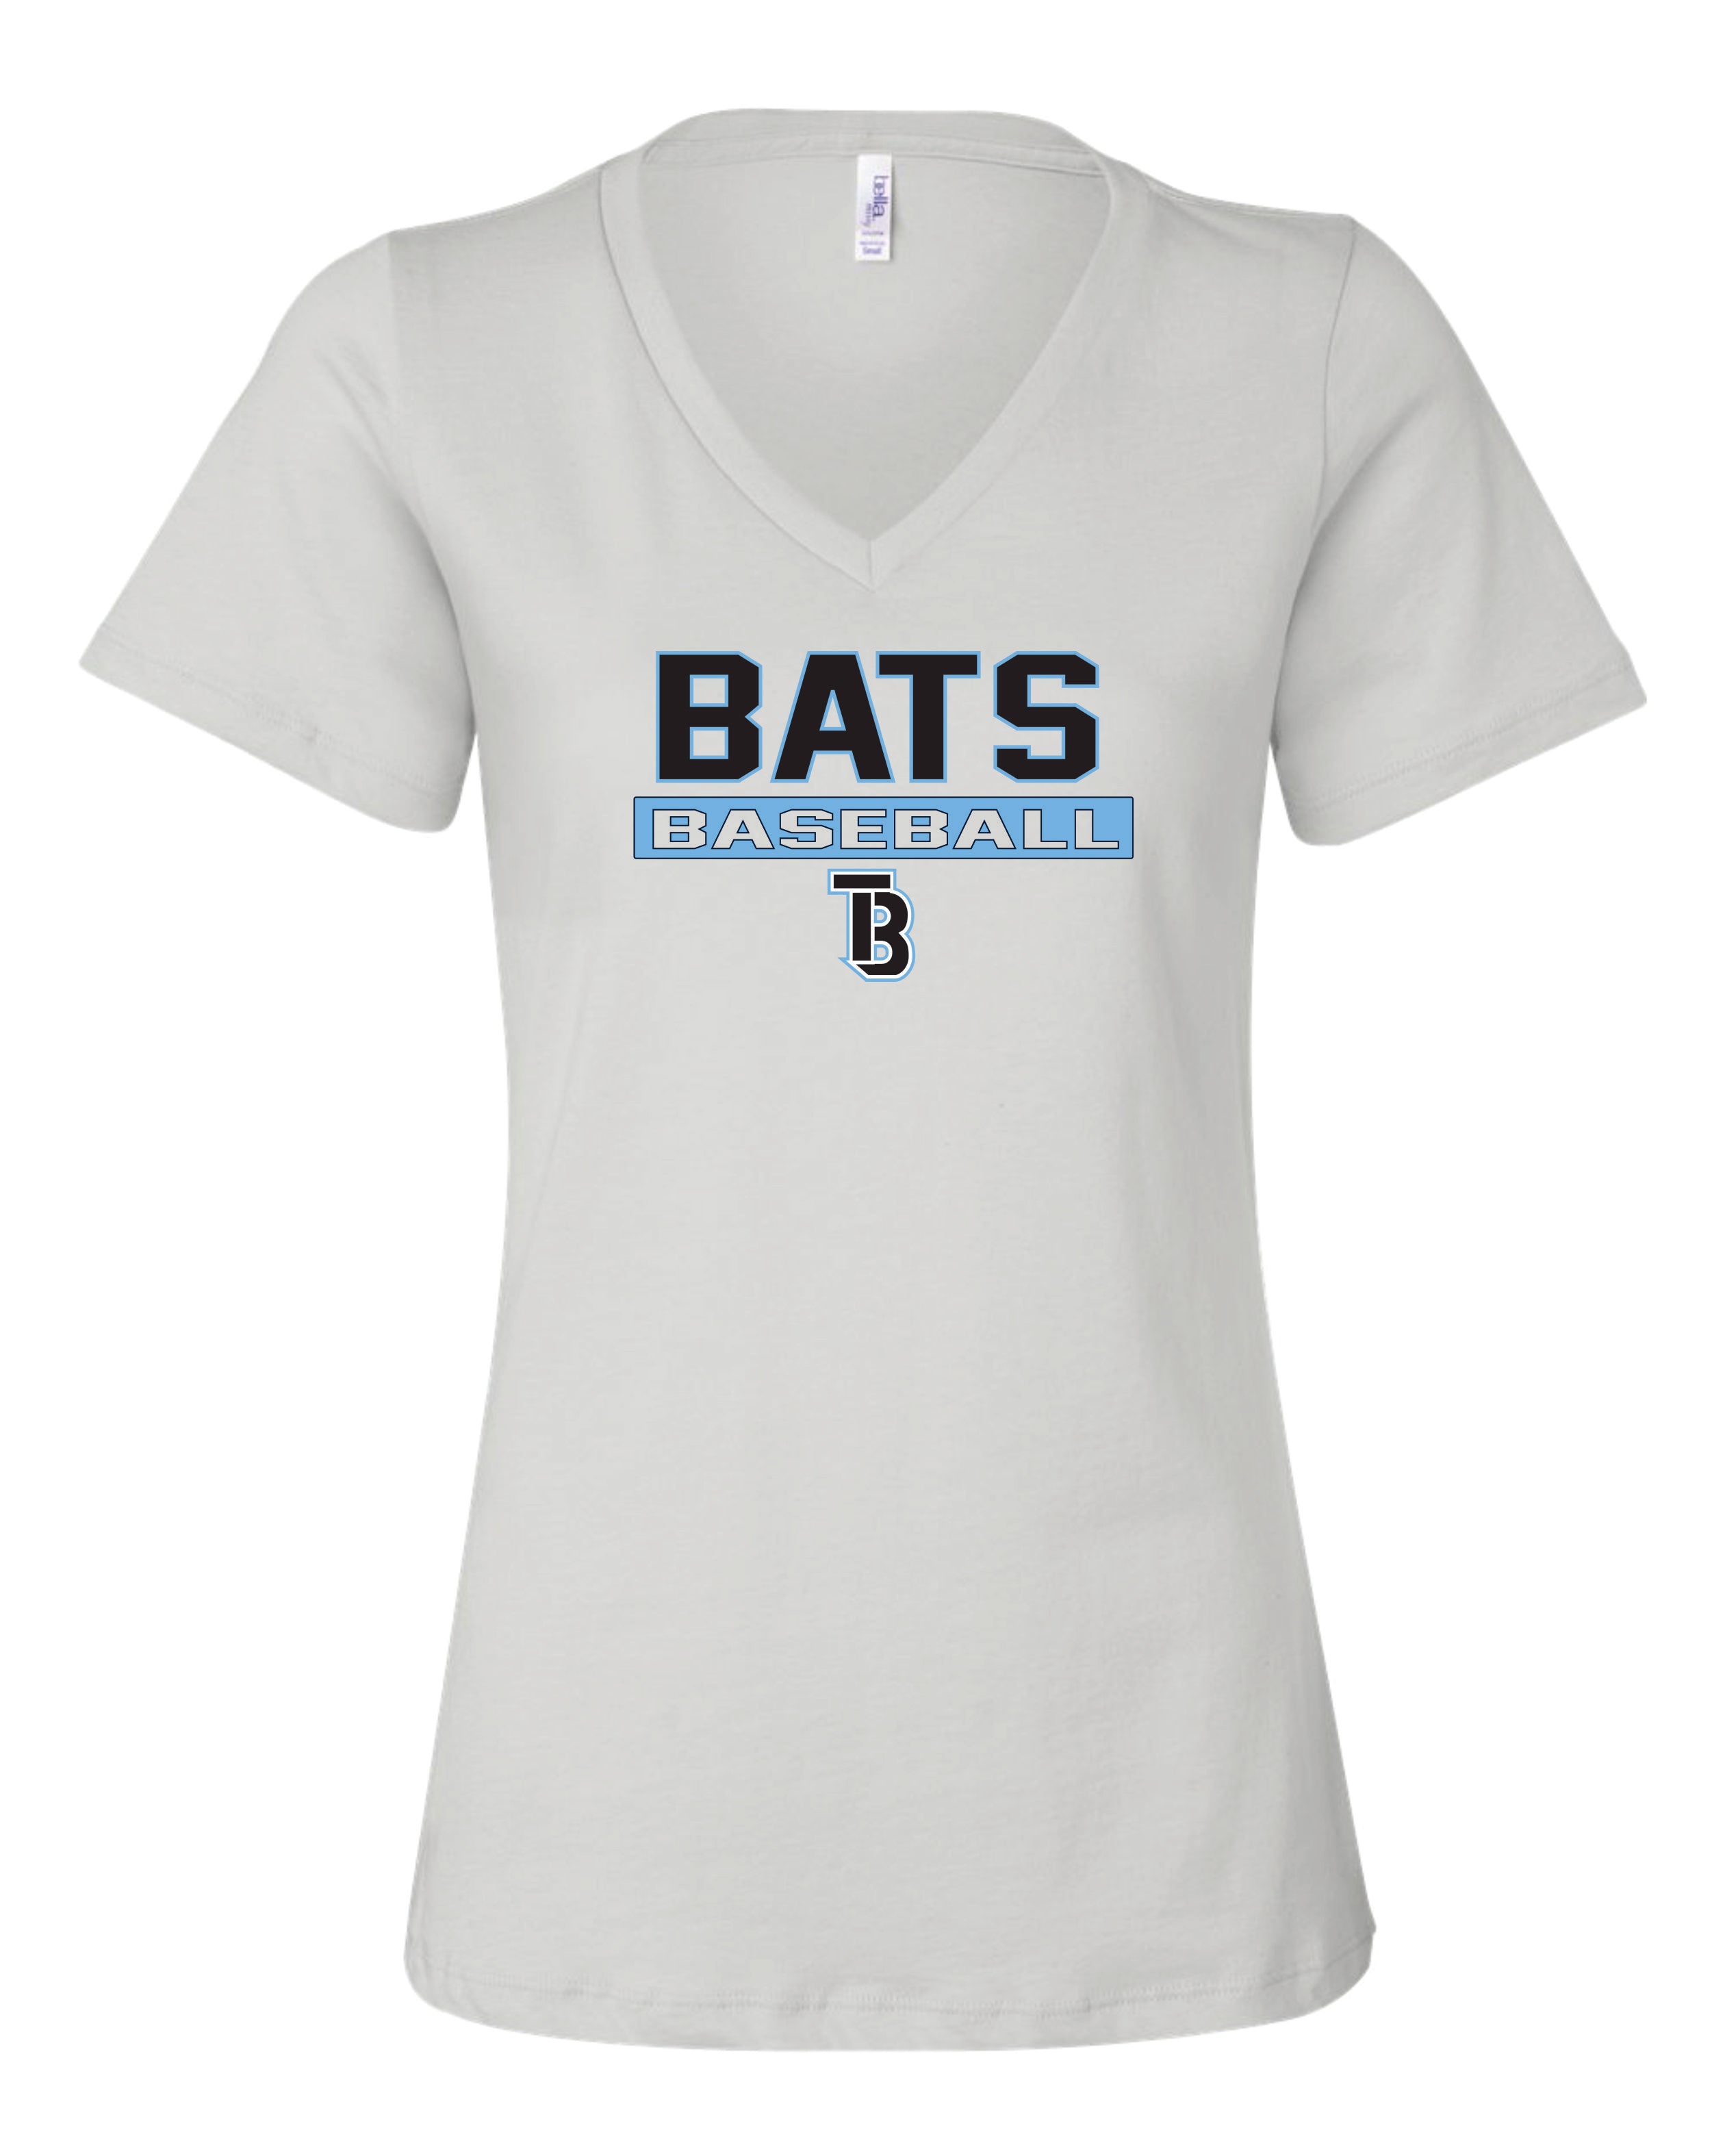 Tampa Bay Bats Women's Bella and Canvas Short Sleeve Relaxed Fit V Neck